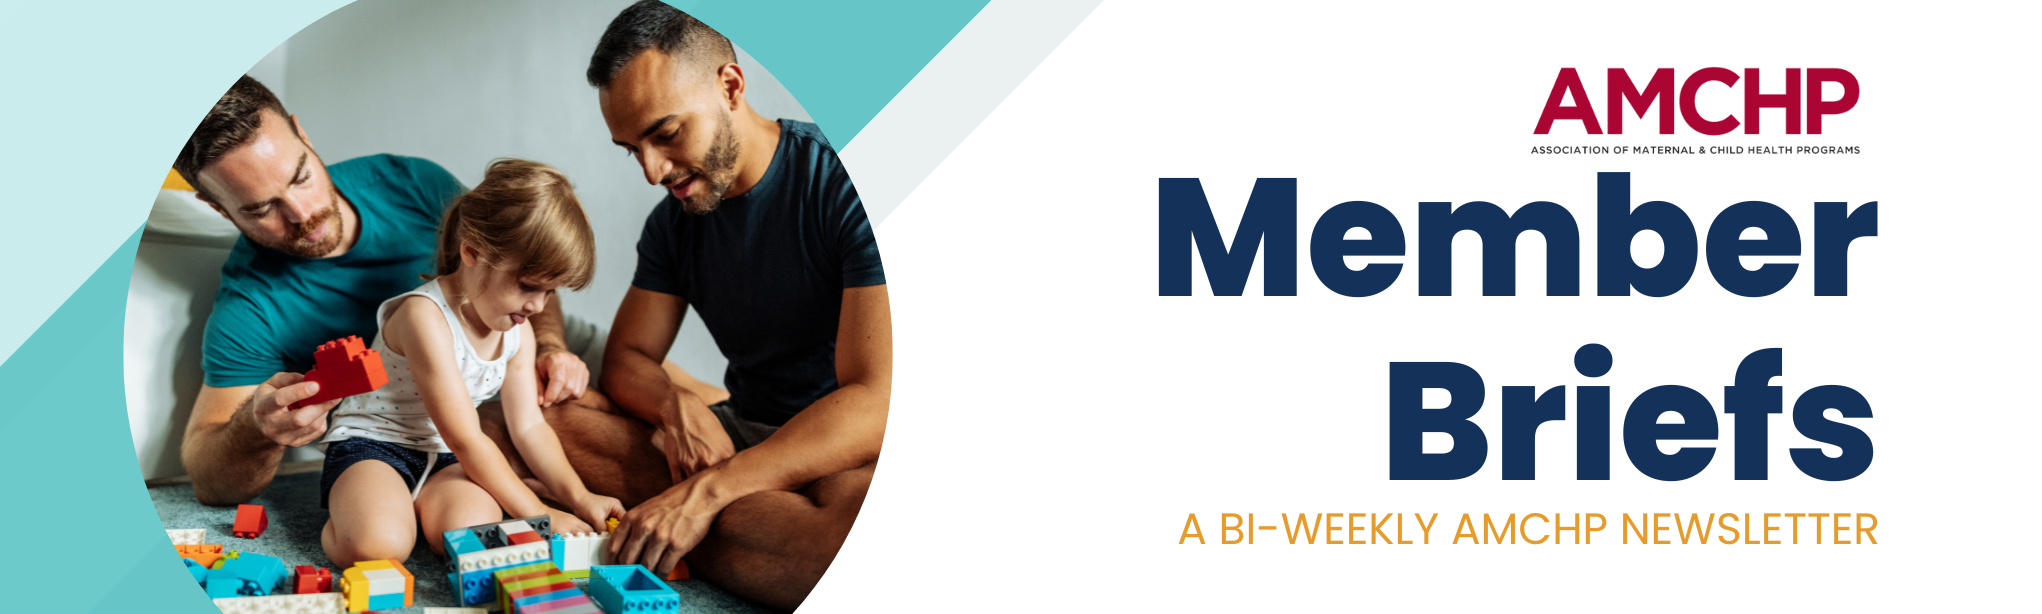 Member Brief Banner. A bi-weekly AMCHP newsletter. Image of two fathers playing blocks with a young child on the floor. 